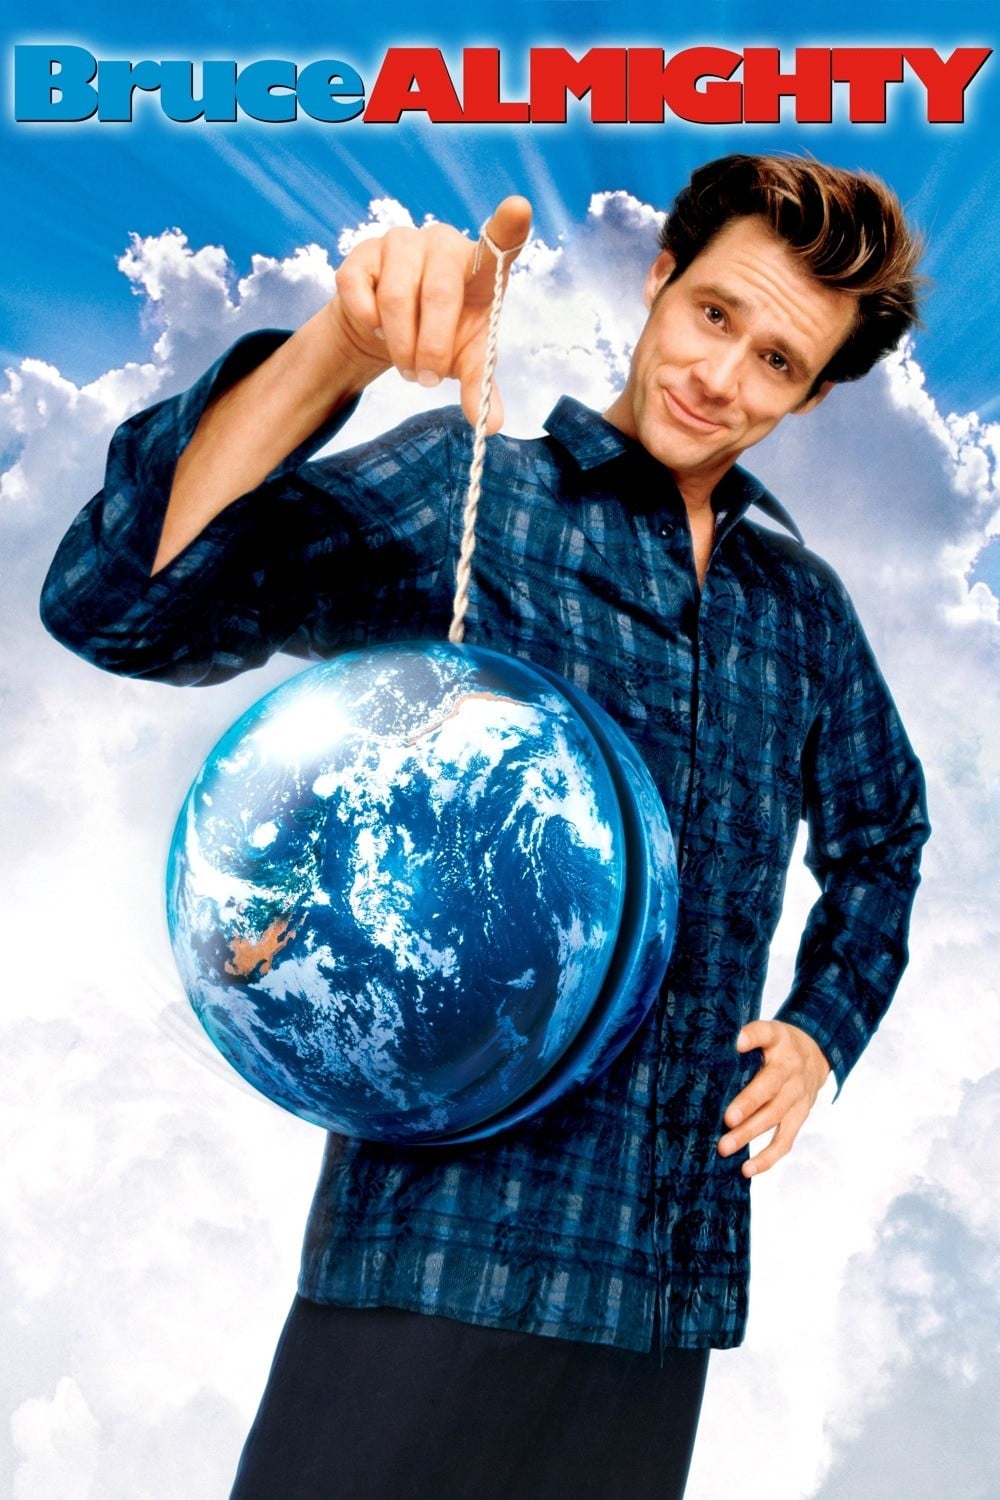 Bruce Almighty Picture